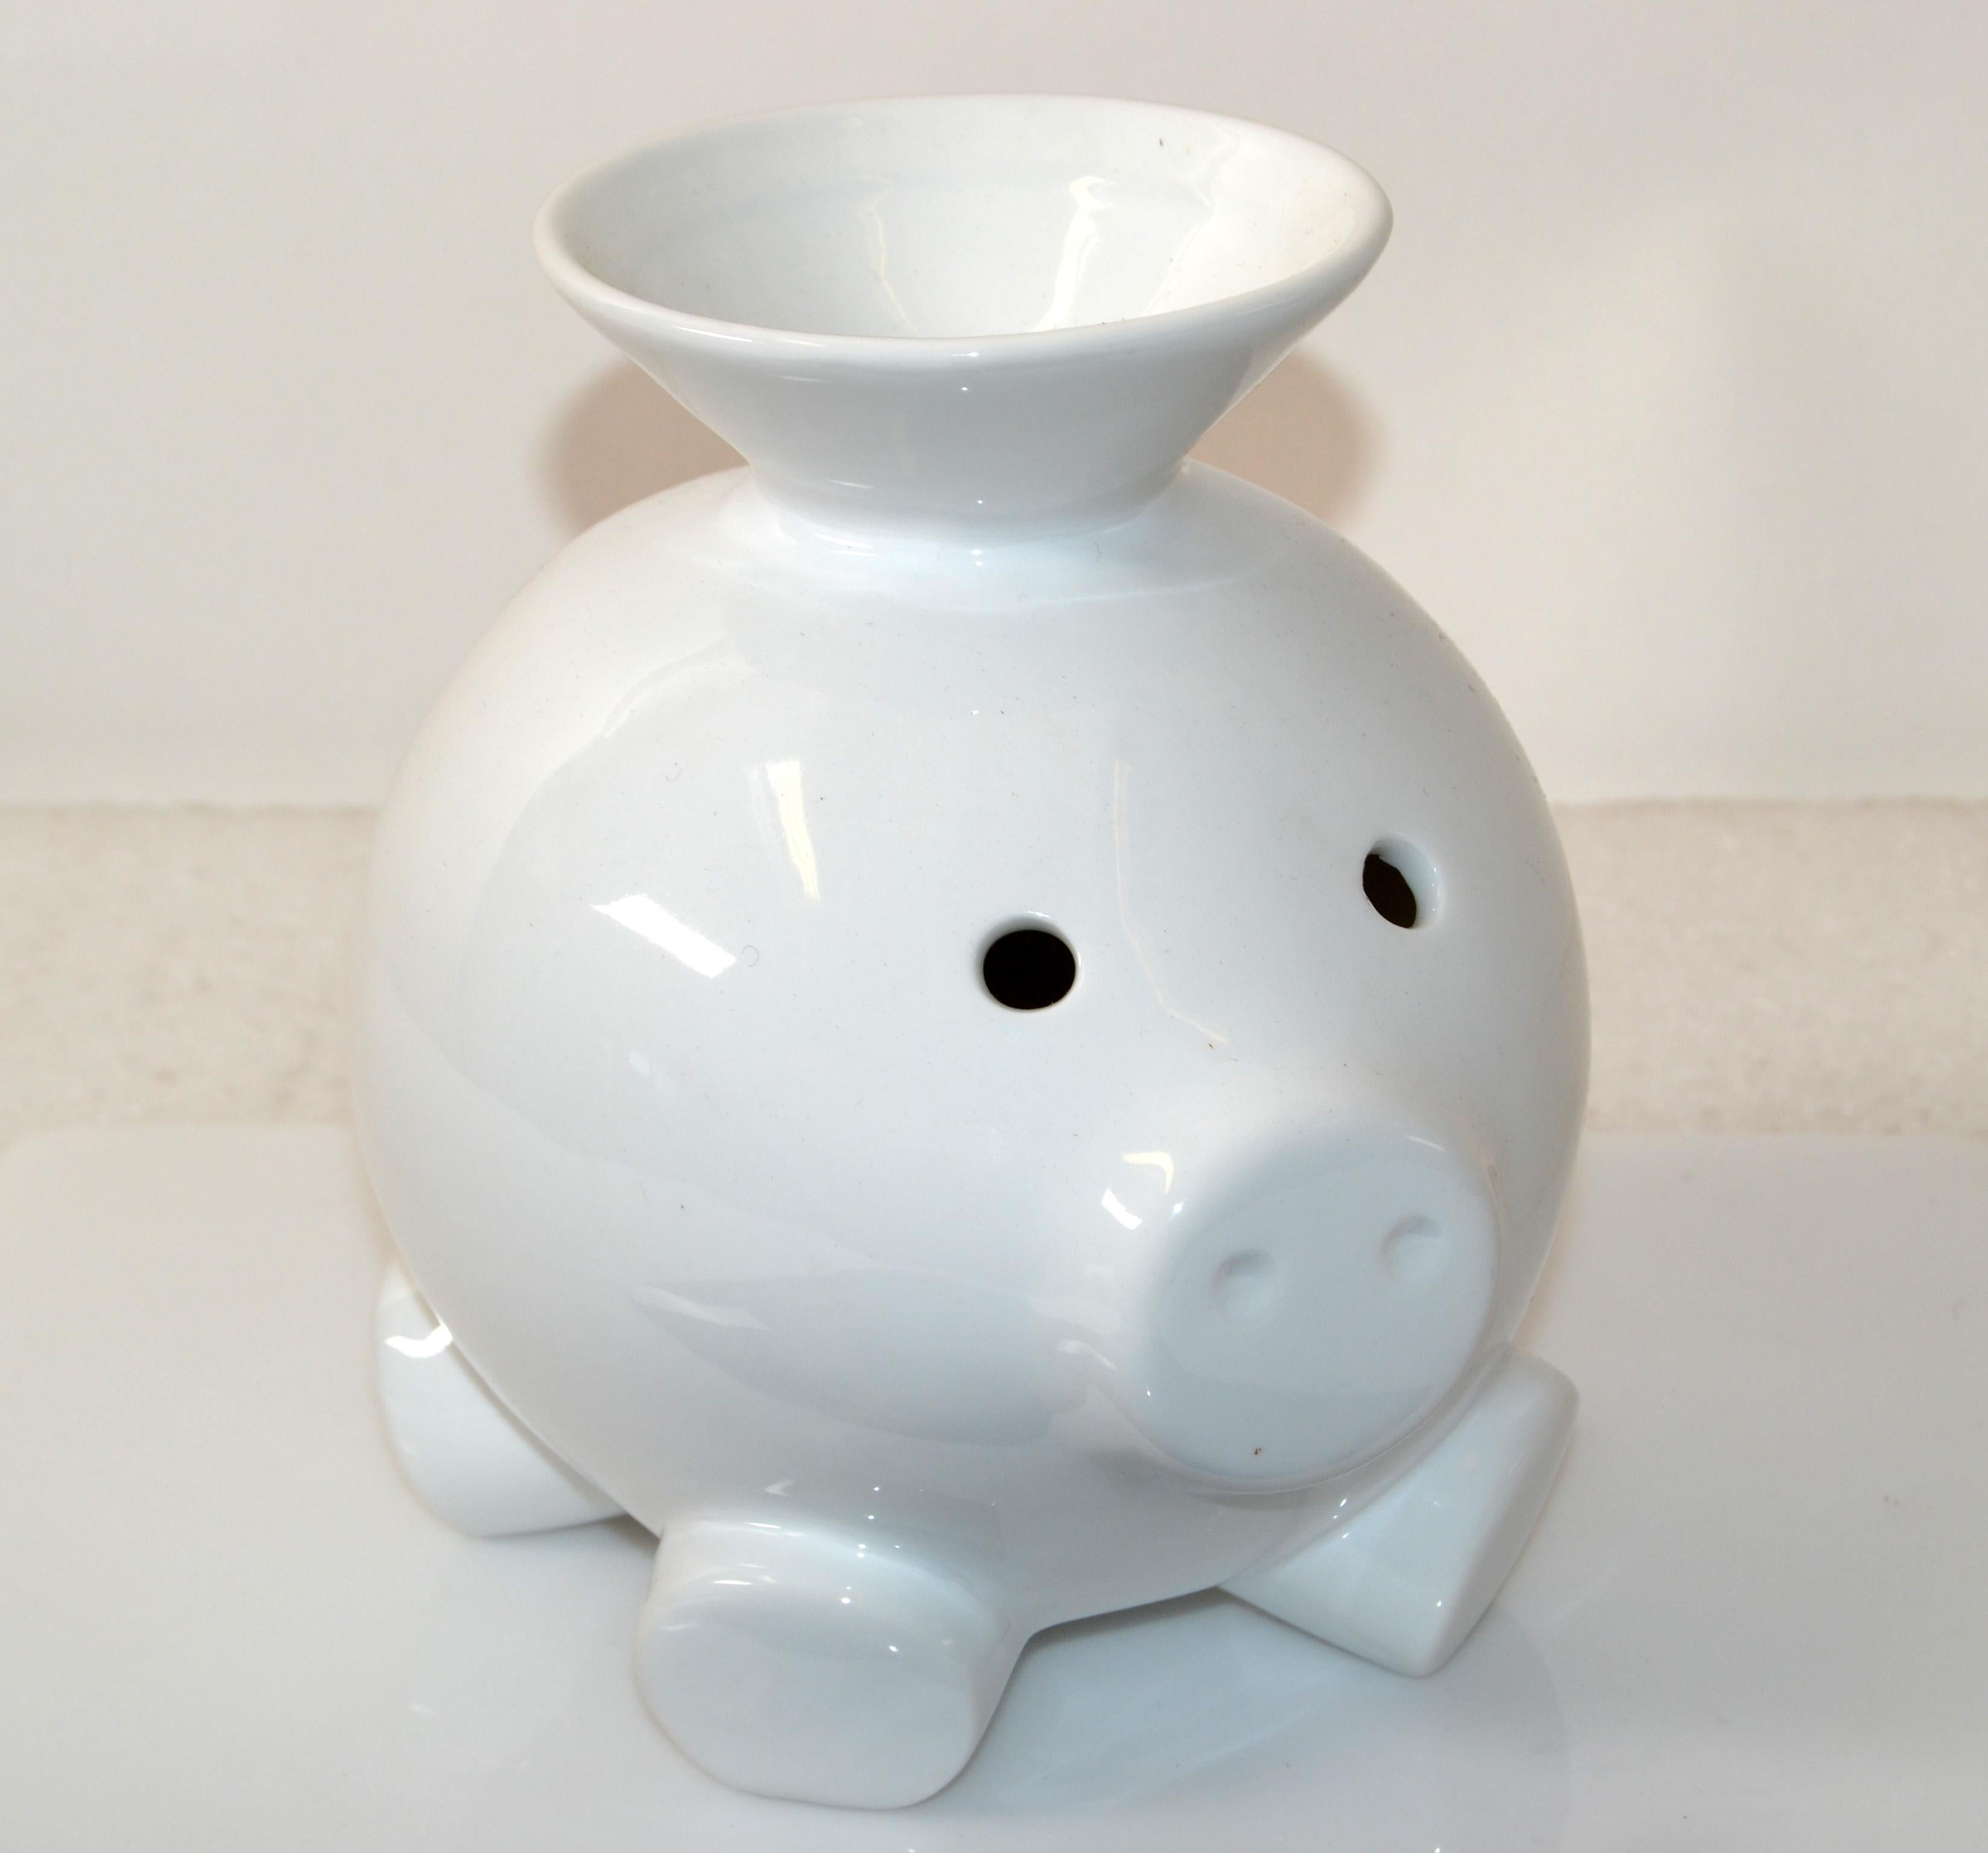 Scott Henderson Design for Mint Inc. White porcelain open top pig, piggy bank, animal sculpture Mid-Century Modern.
Marked at Base, Makers Trademark.
Top fill-funnel makes it easy to collect the change, coins easily.
This Collectible Design